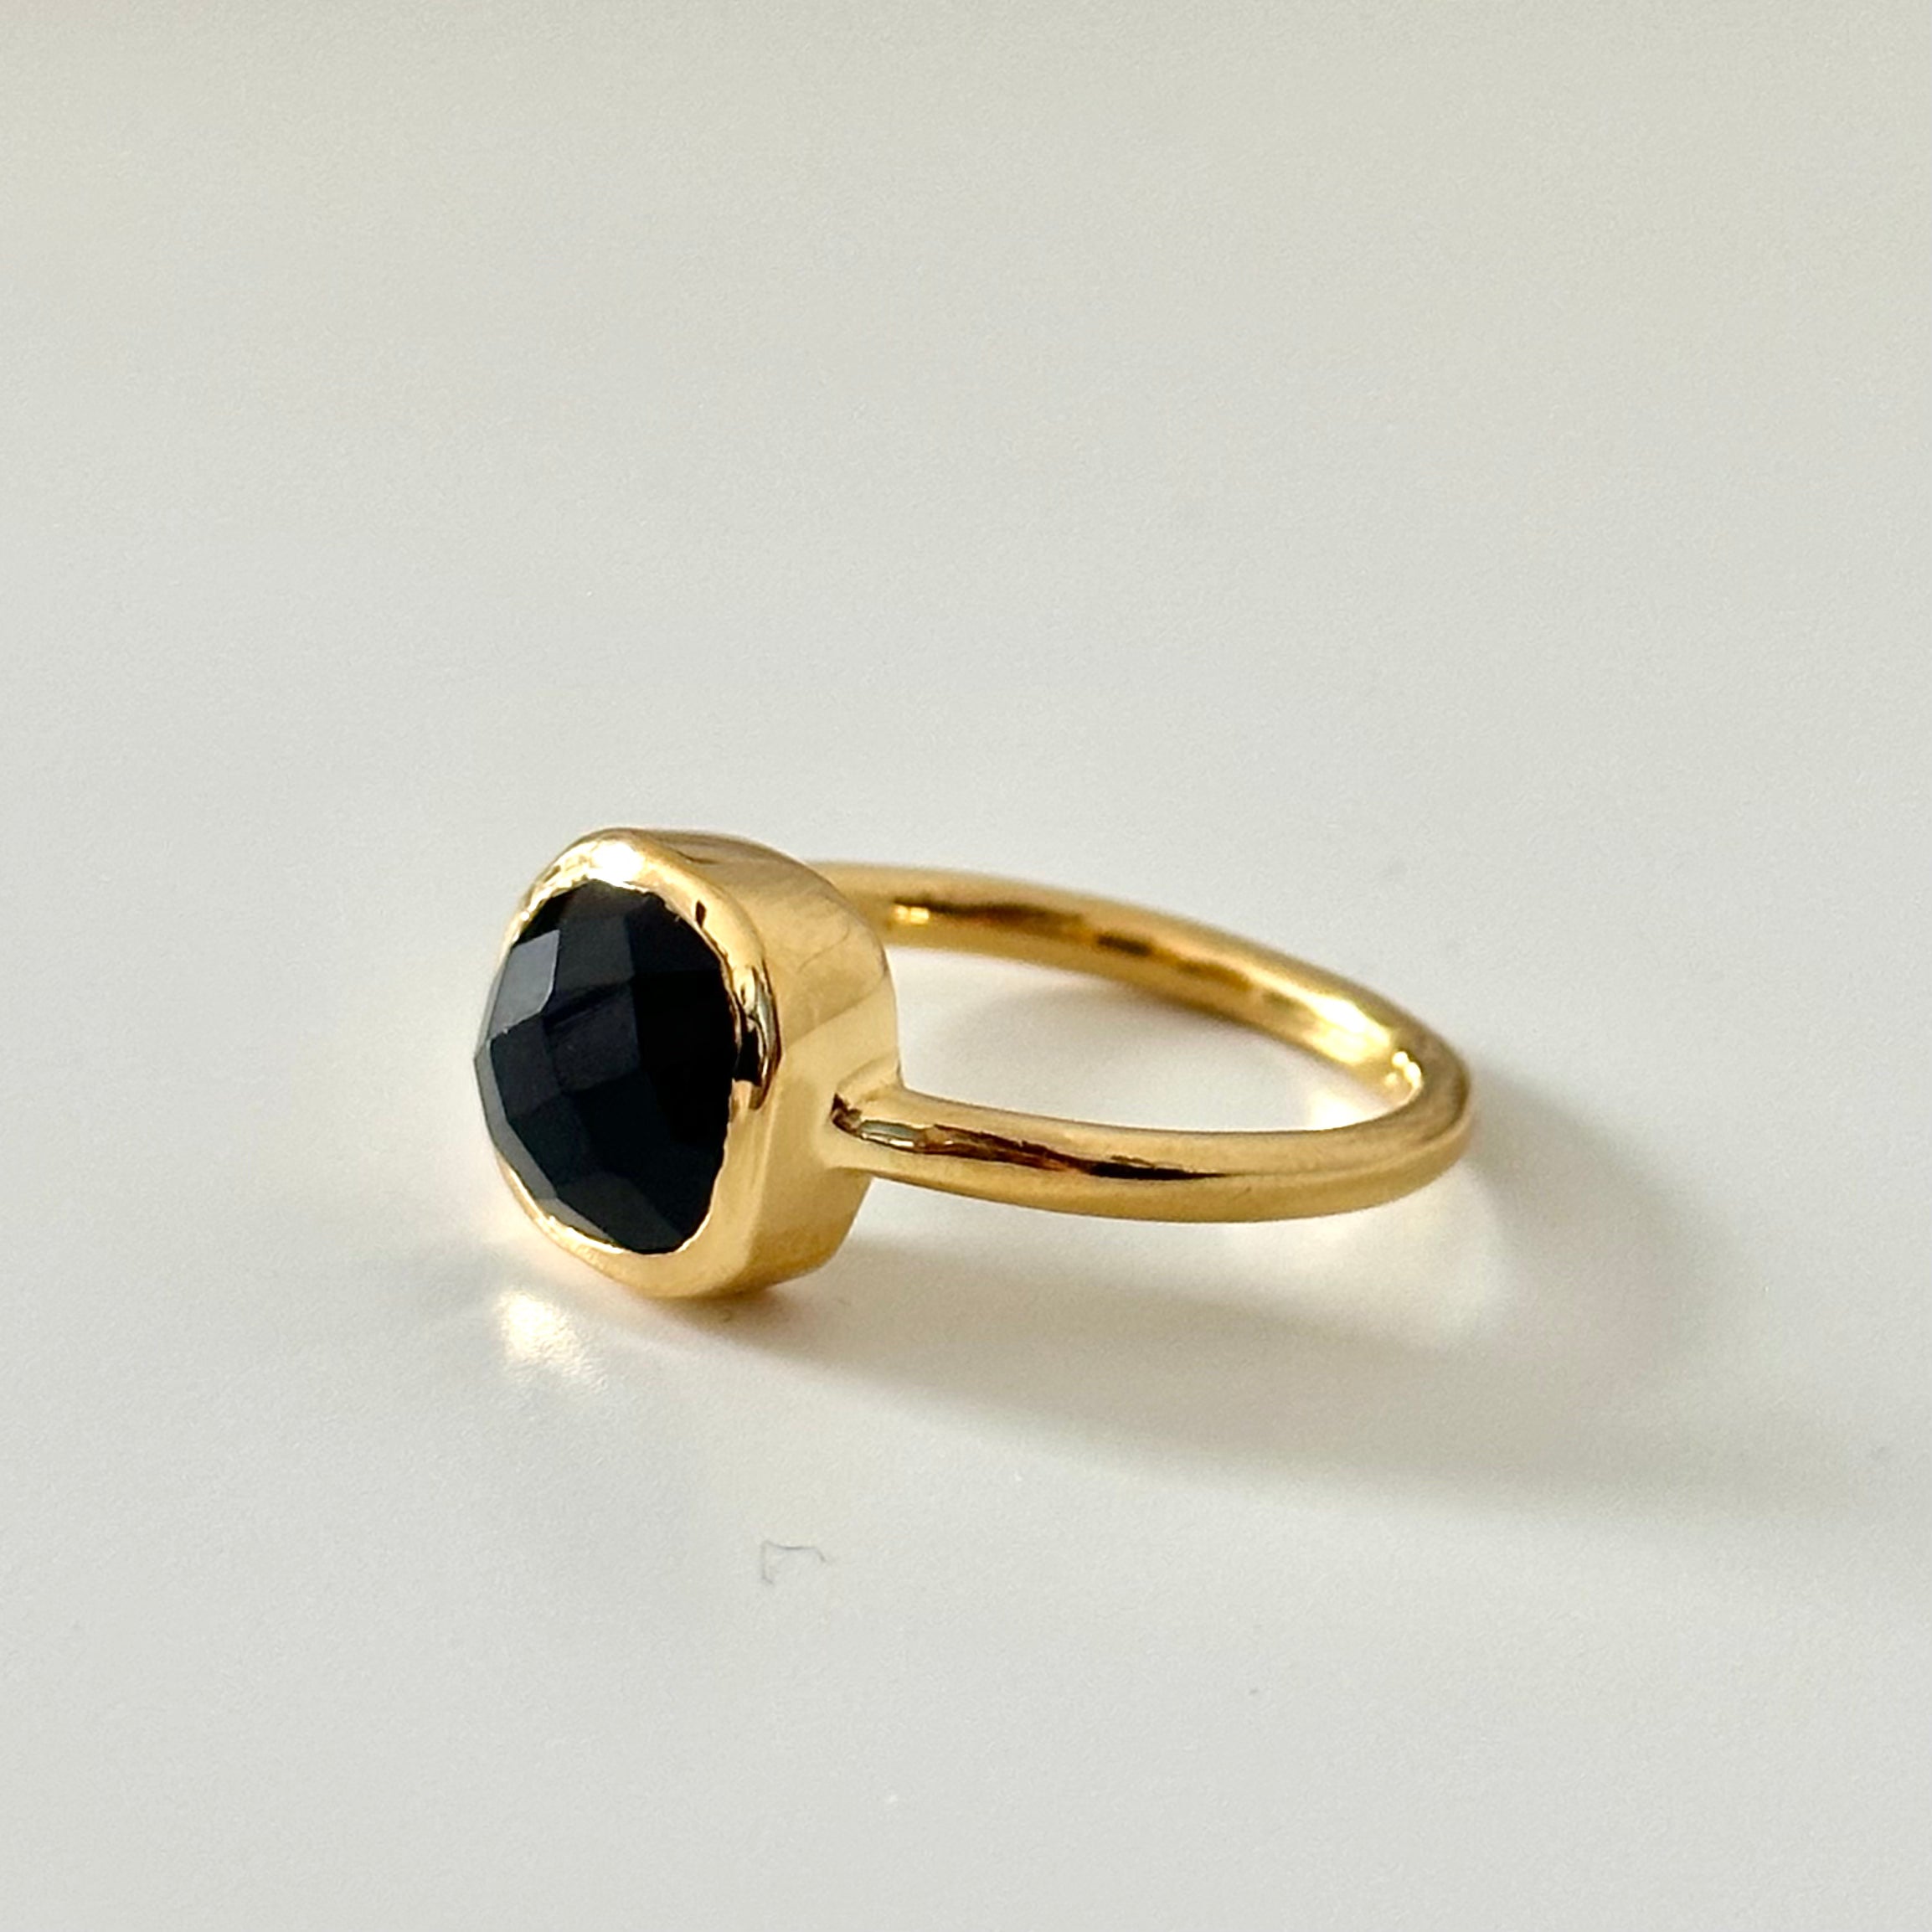 Square Cut Natural Gemstone Gold Plated Sterling Silver Solitaire Ring -Black Onyx